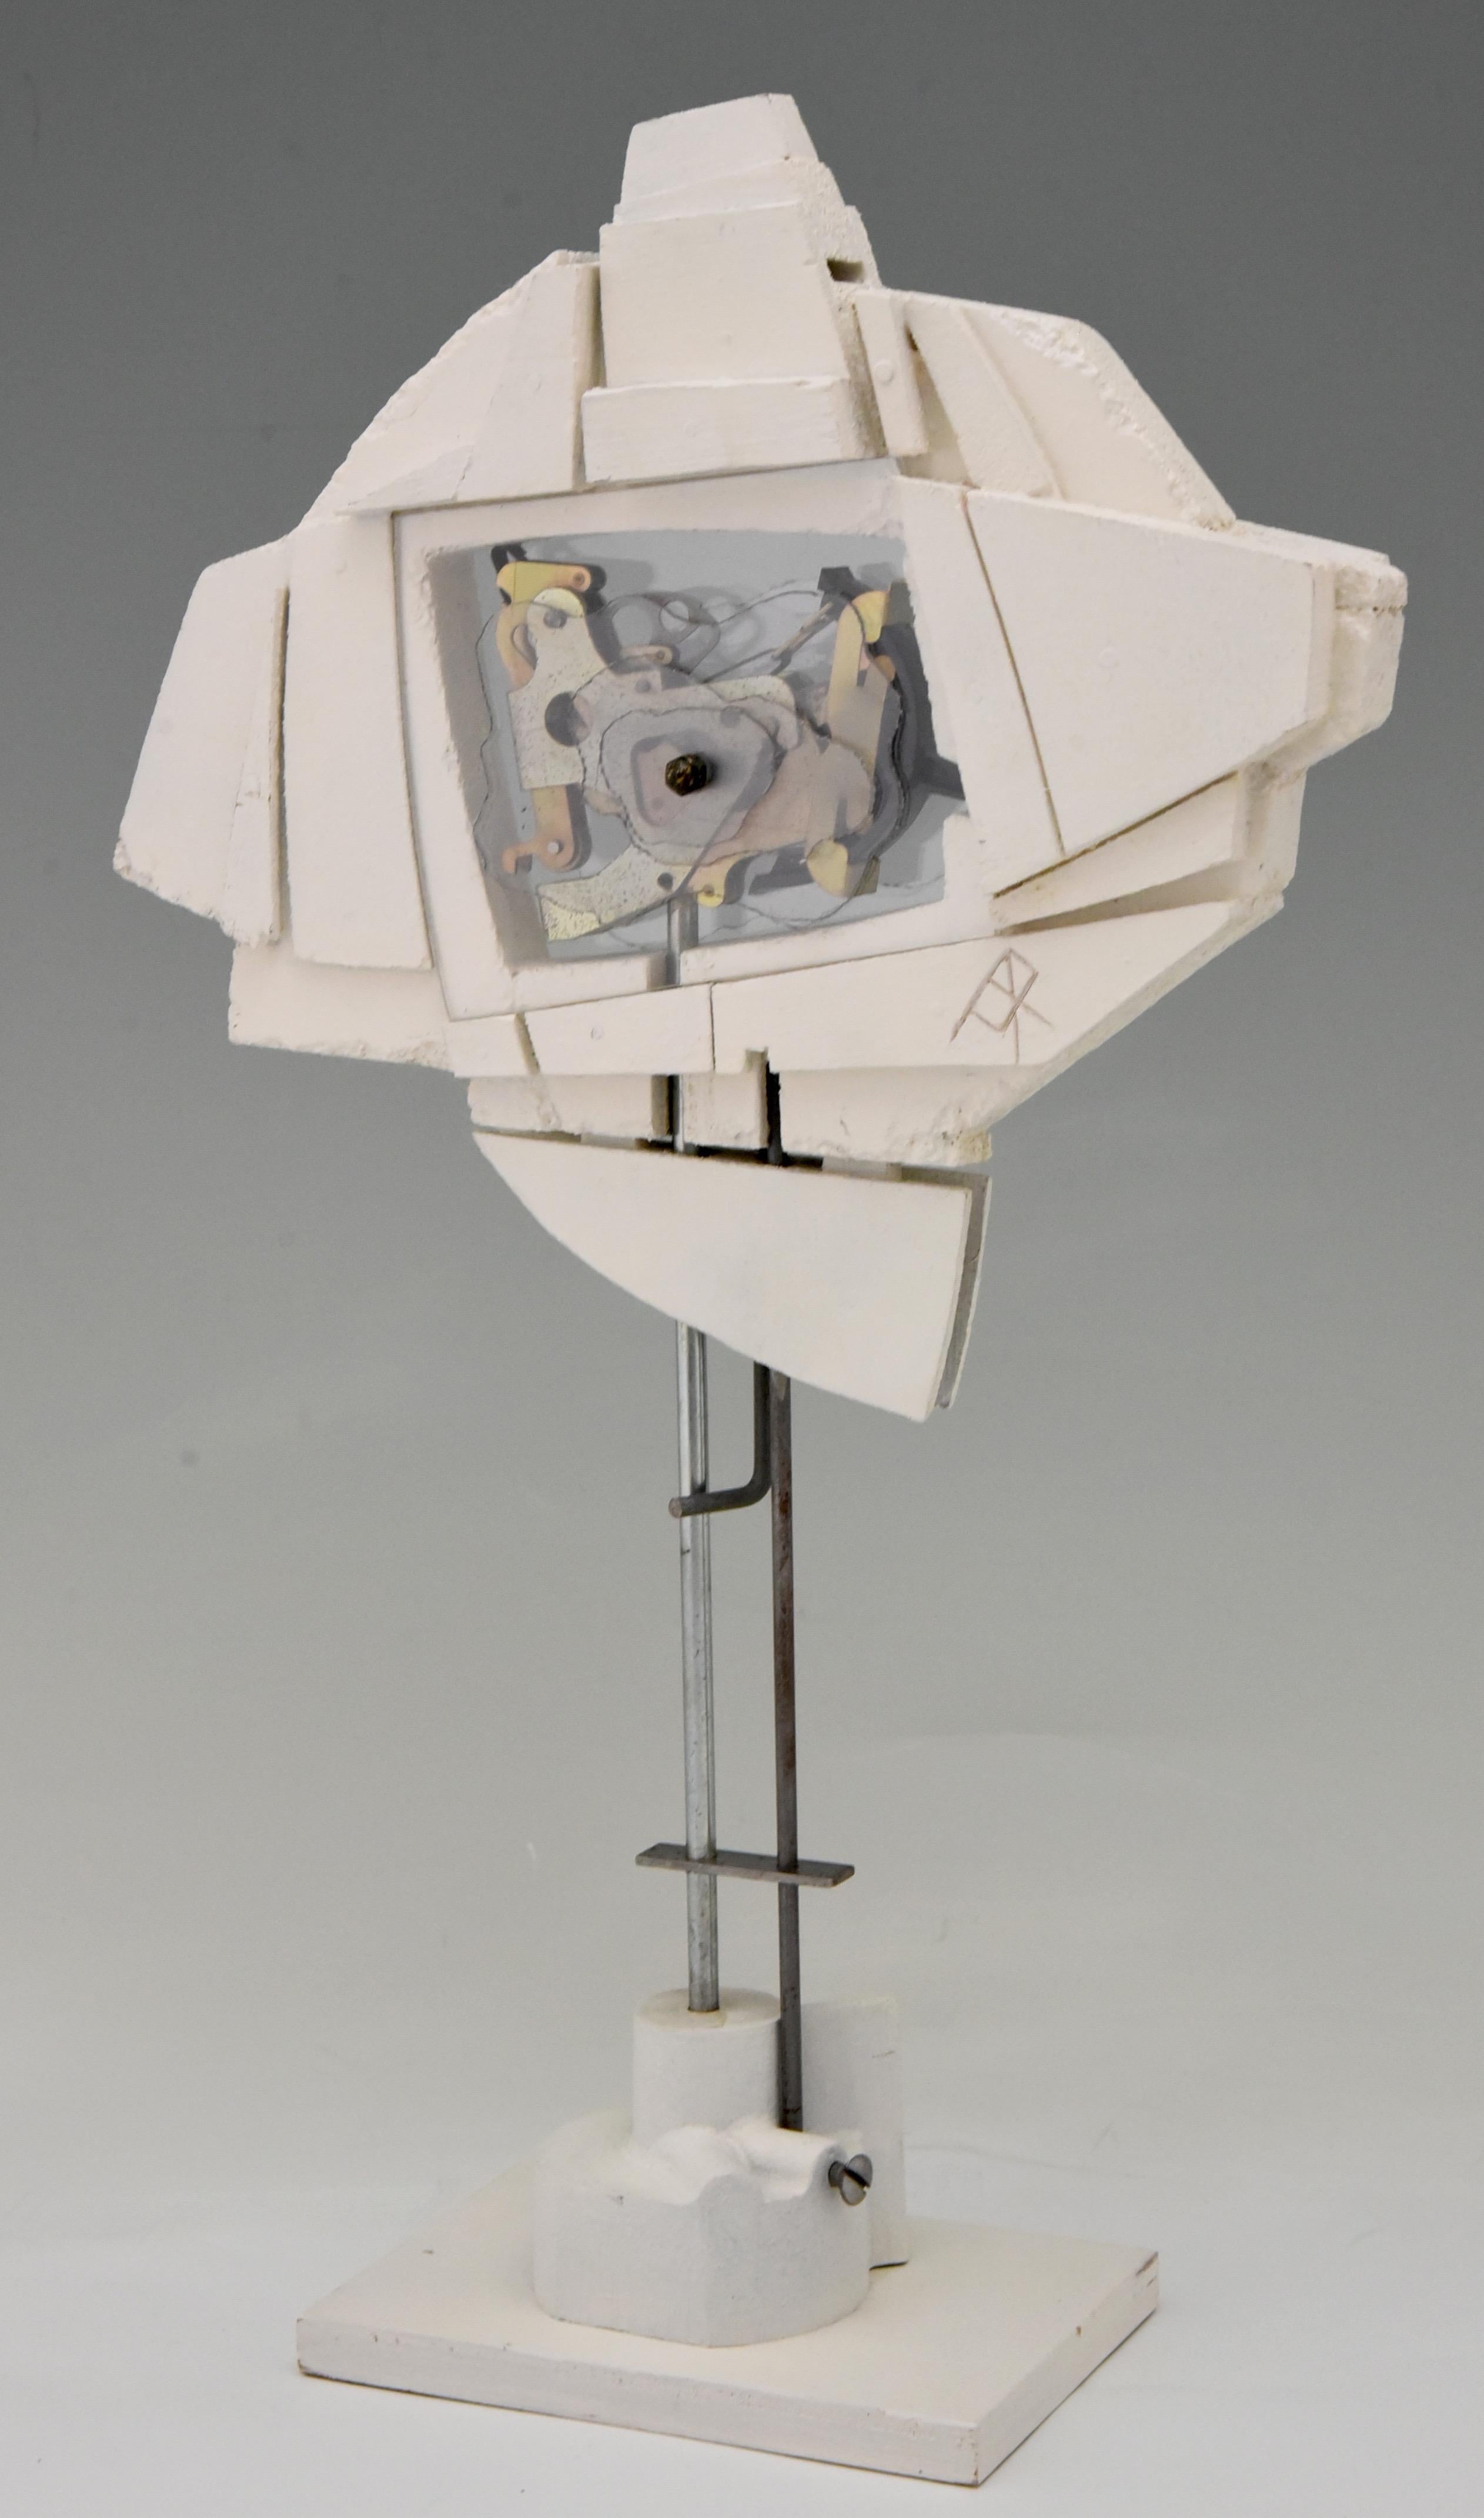 Original midcentury recycled art wooden sculpture with plexiglass and metal by the collage artist André Pailler, France, 1970.
  